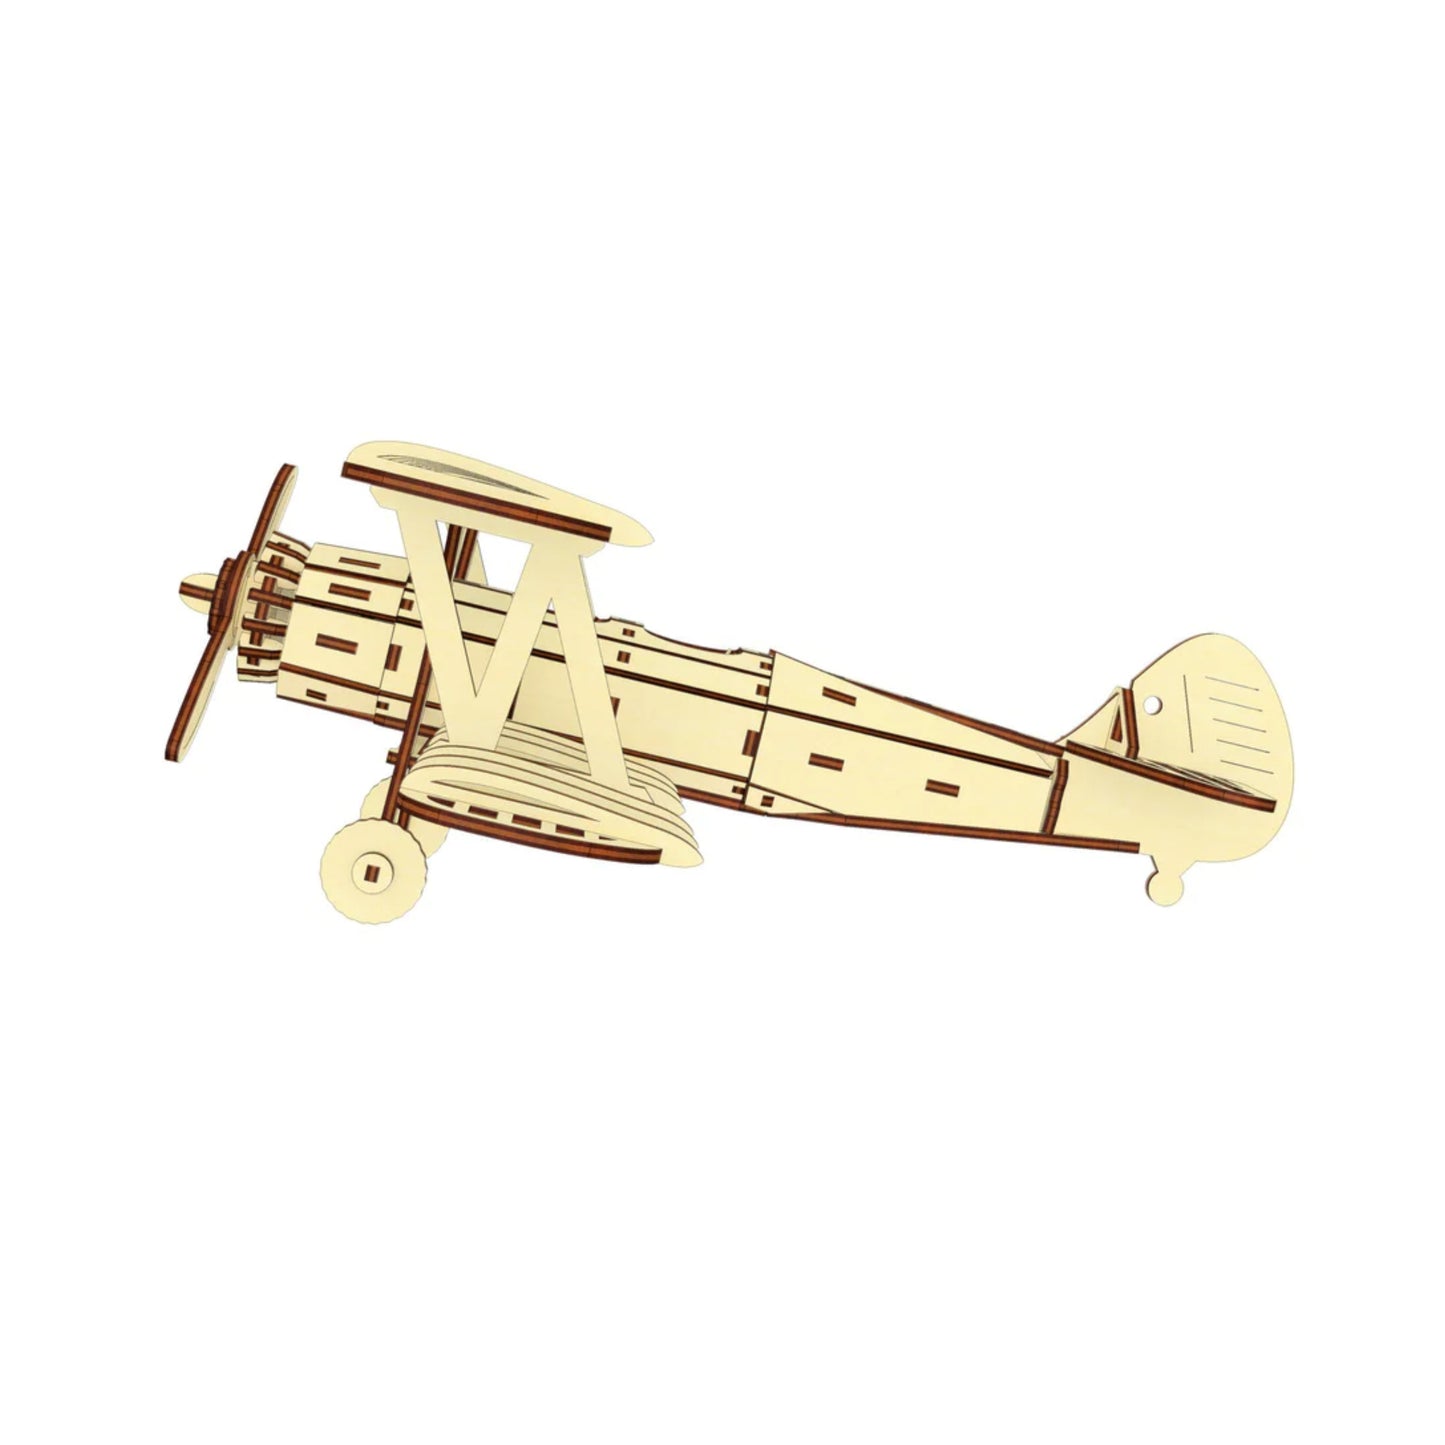 Vintage Aircraft Detailed Biplane Model With Rotating Propeller